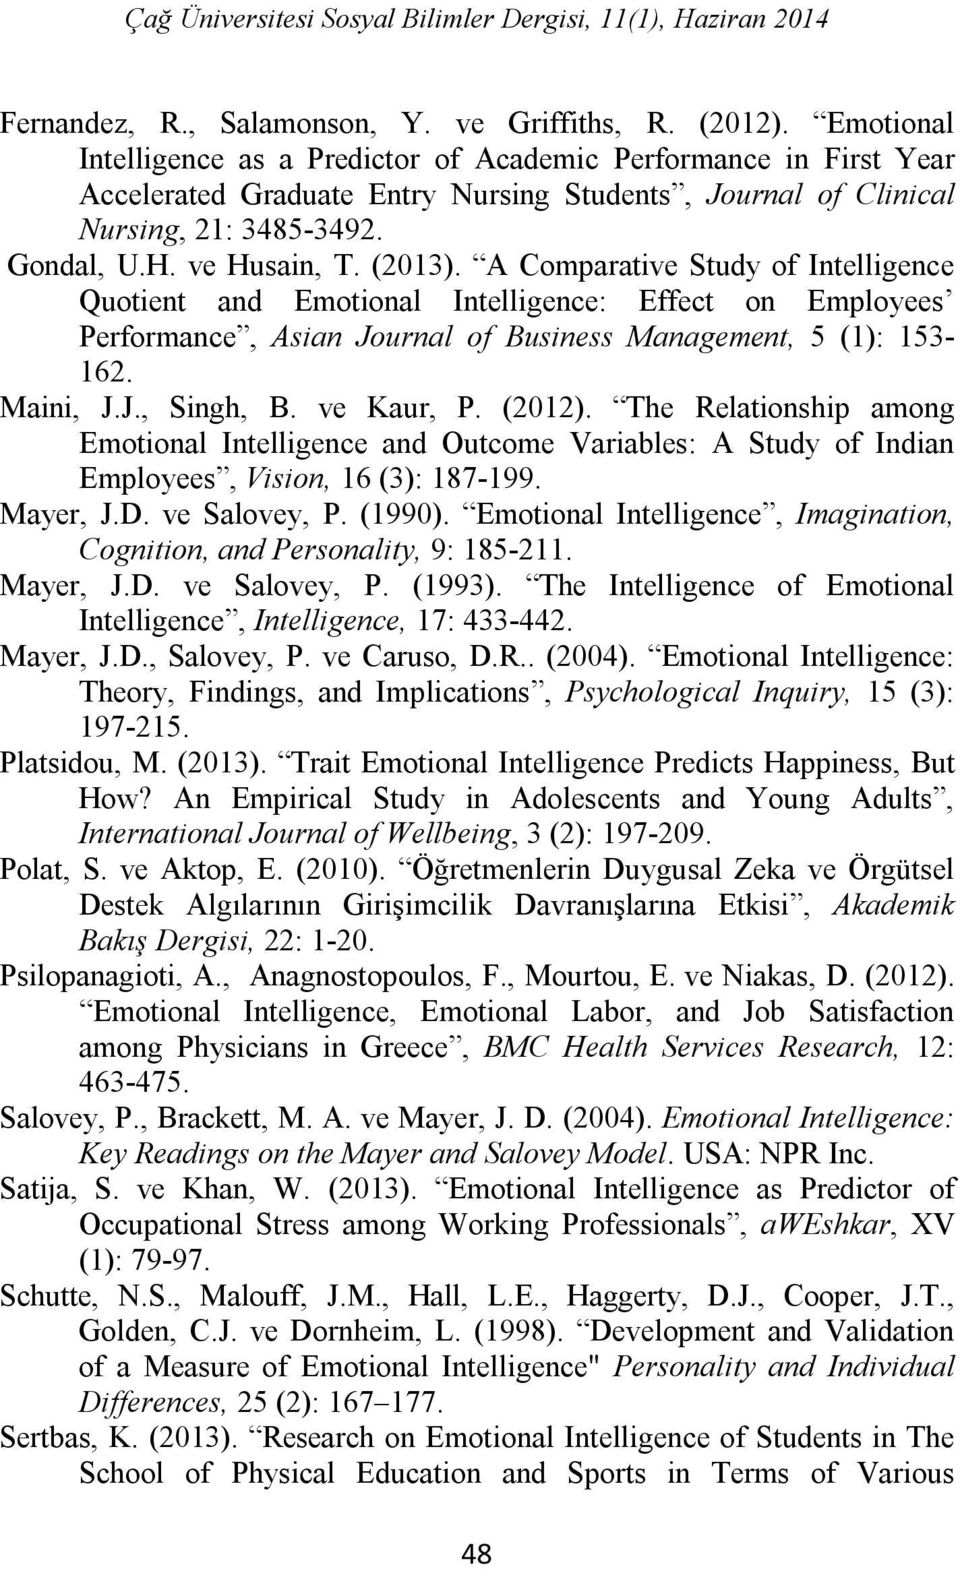 A Comparative Study of Intelligence Quotient and Emotional Intelligence: Effect on Employees Performance, Asian Journal of Business Management, 5 (1): 153-162. Maini, J.J., Singh, B. ve Kaur, P.